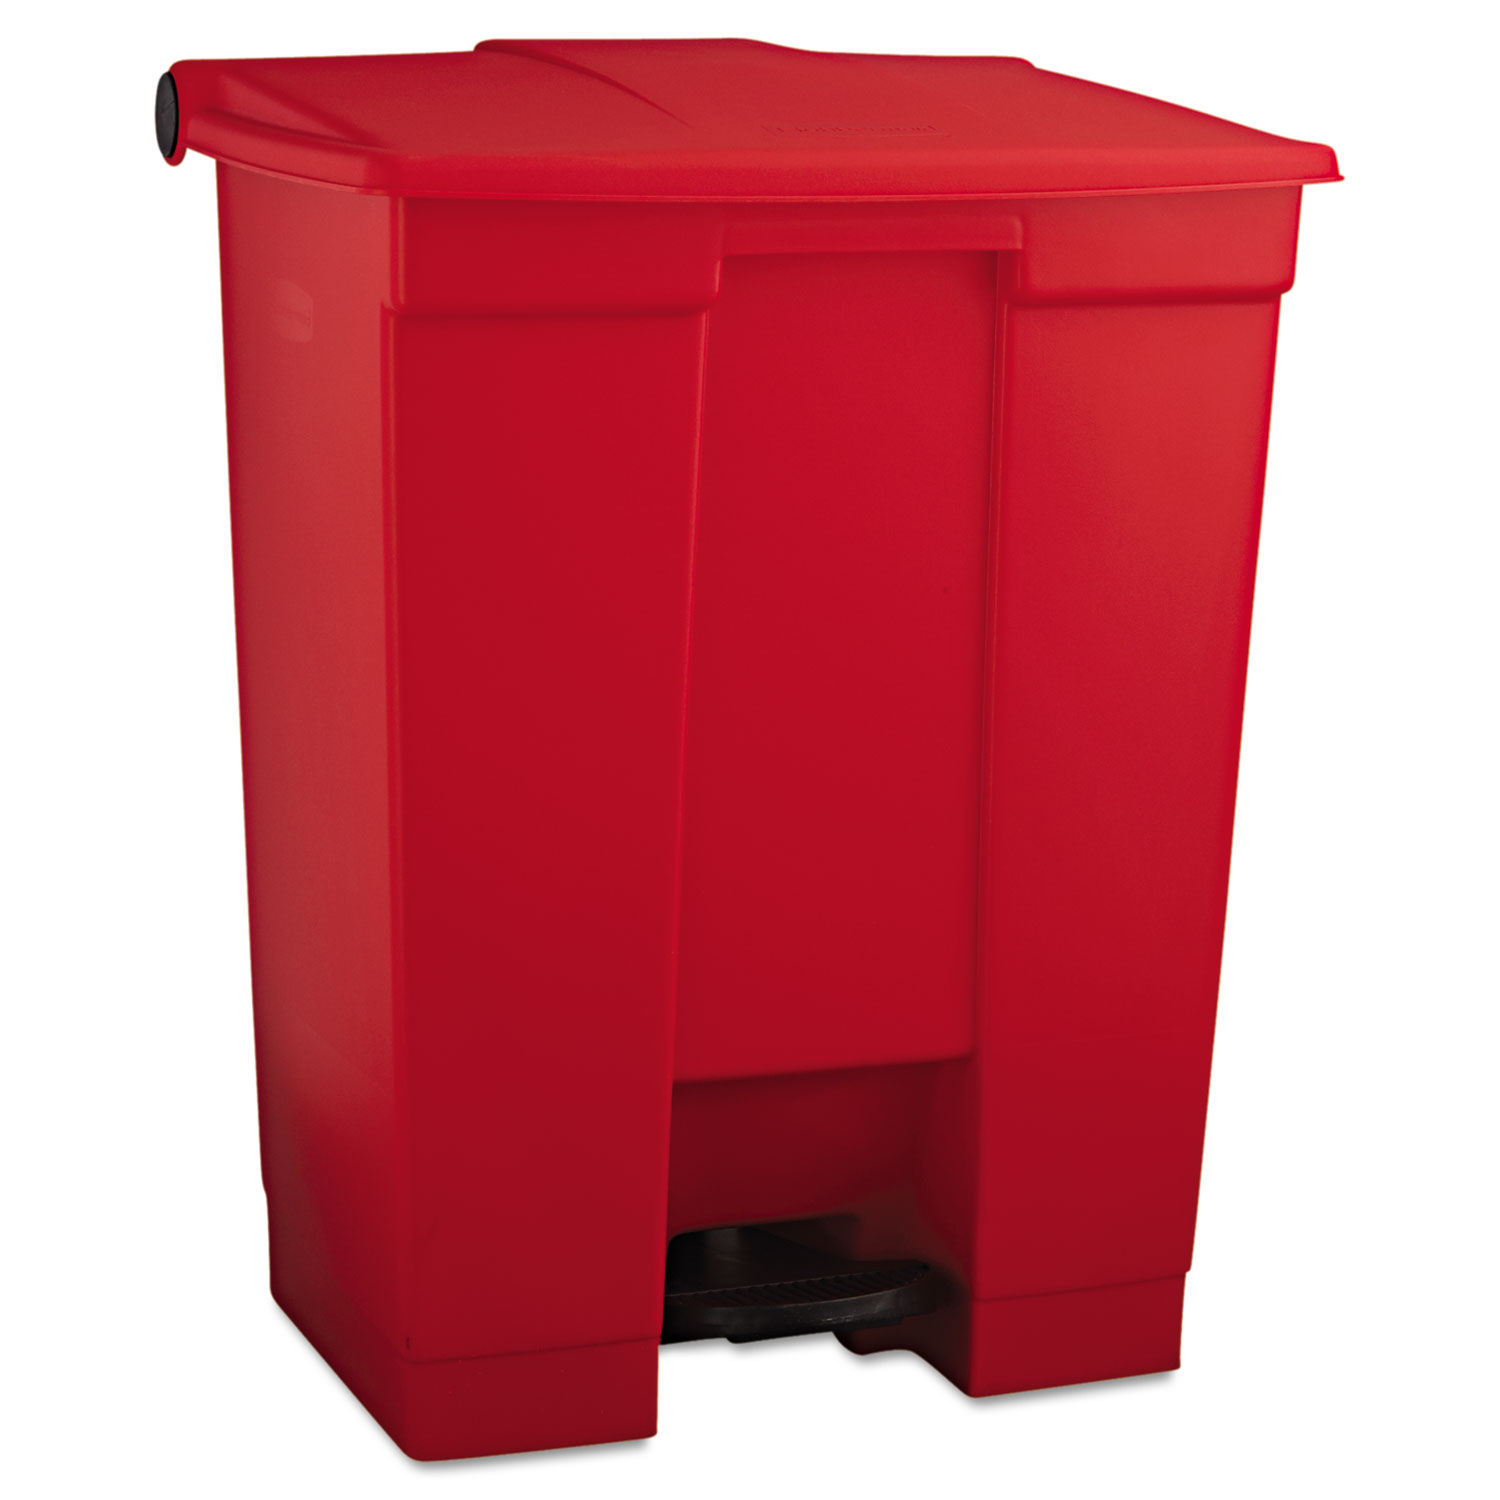  Rubbermaid Commercial FG614500RED Indoor Utility Step-On Waste Container, Rectangular, Plastic, 18 gal, Red (RCP614500RED) 